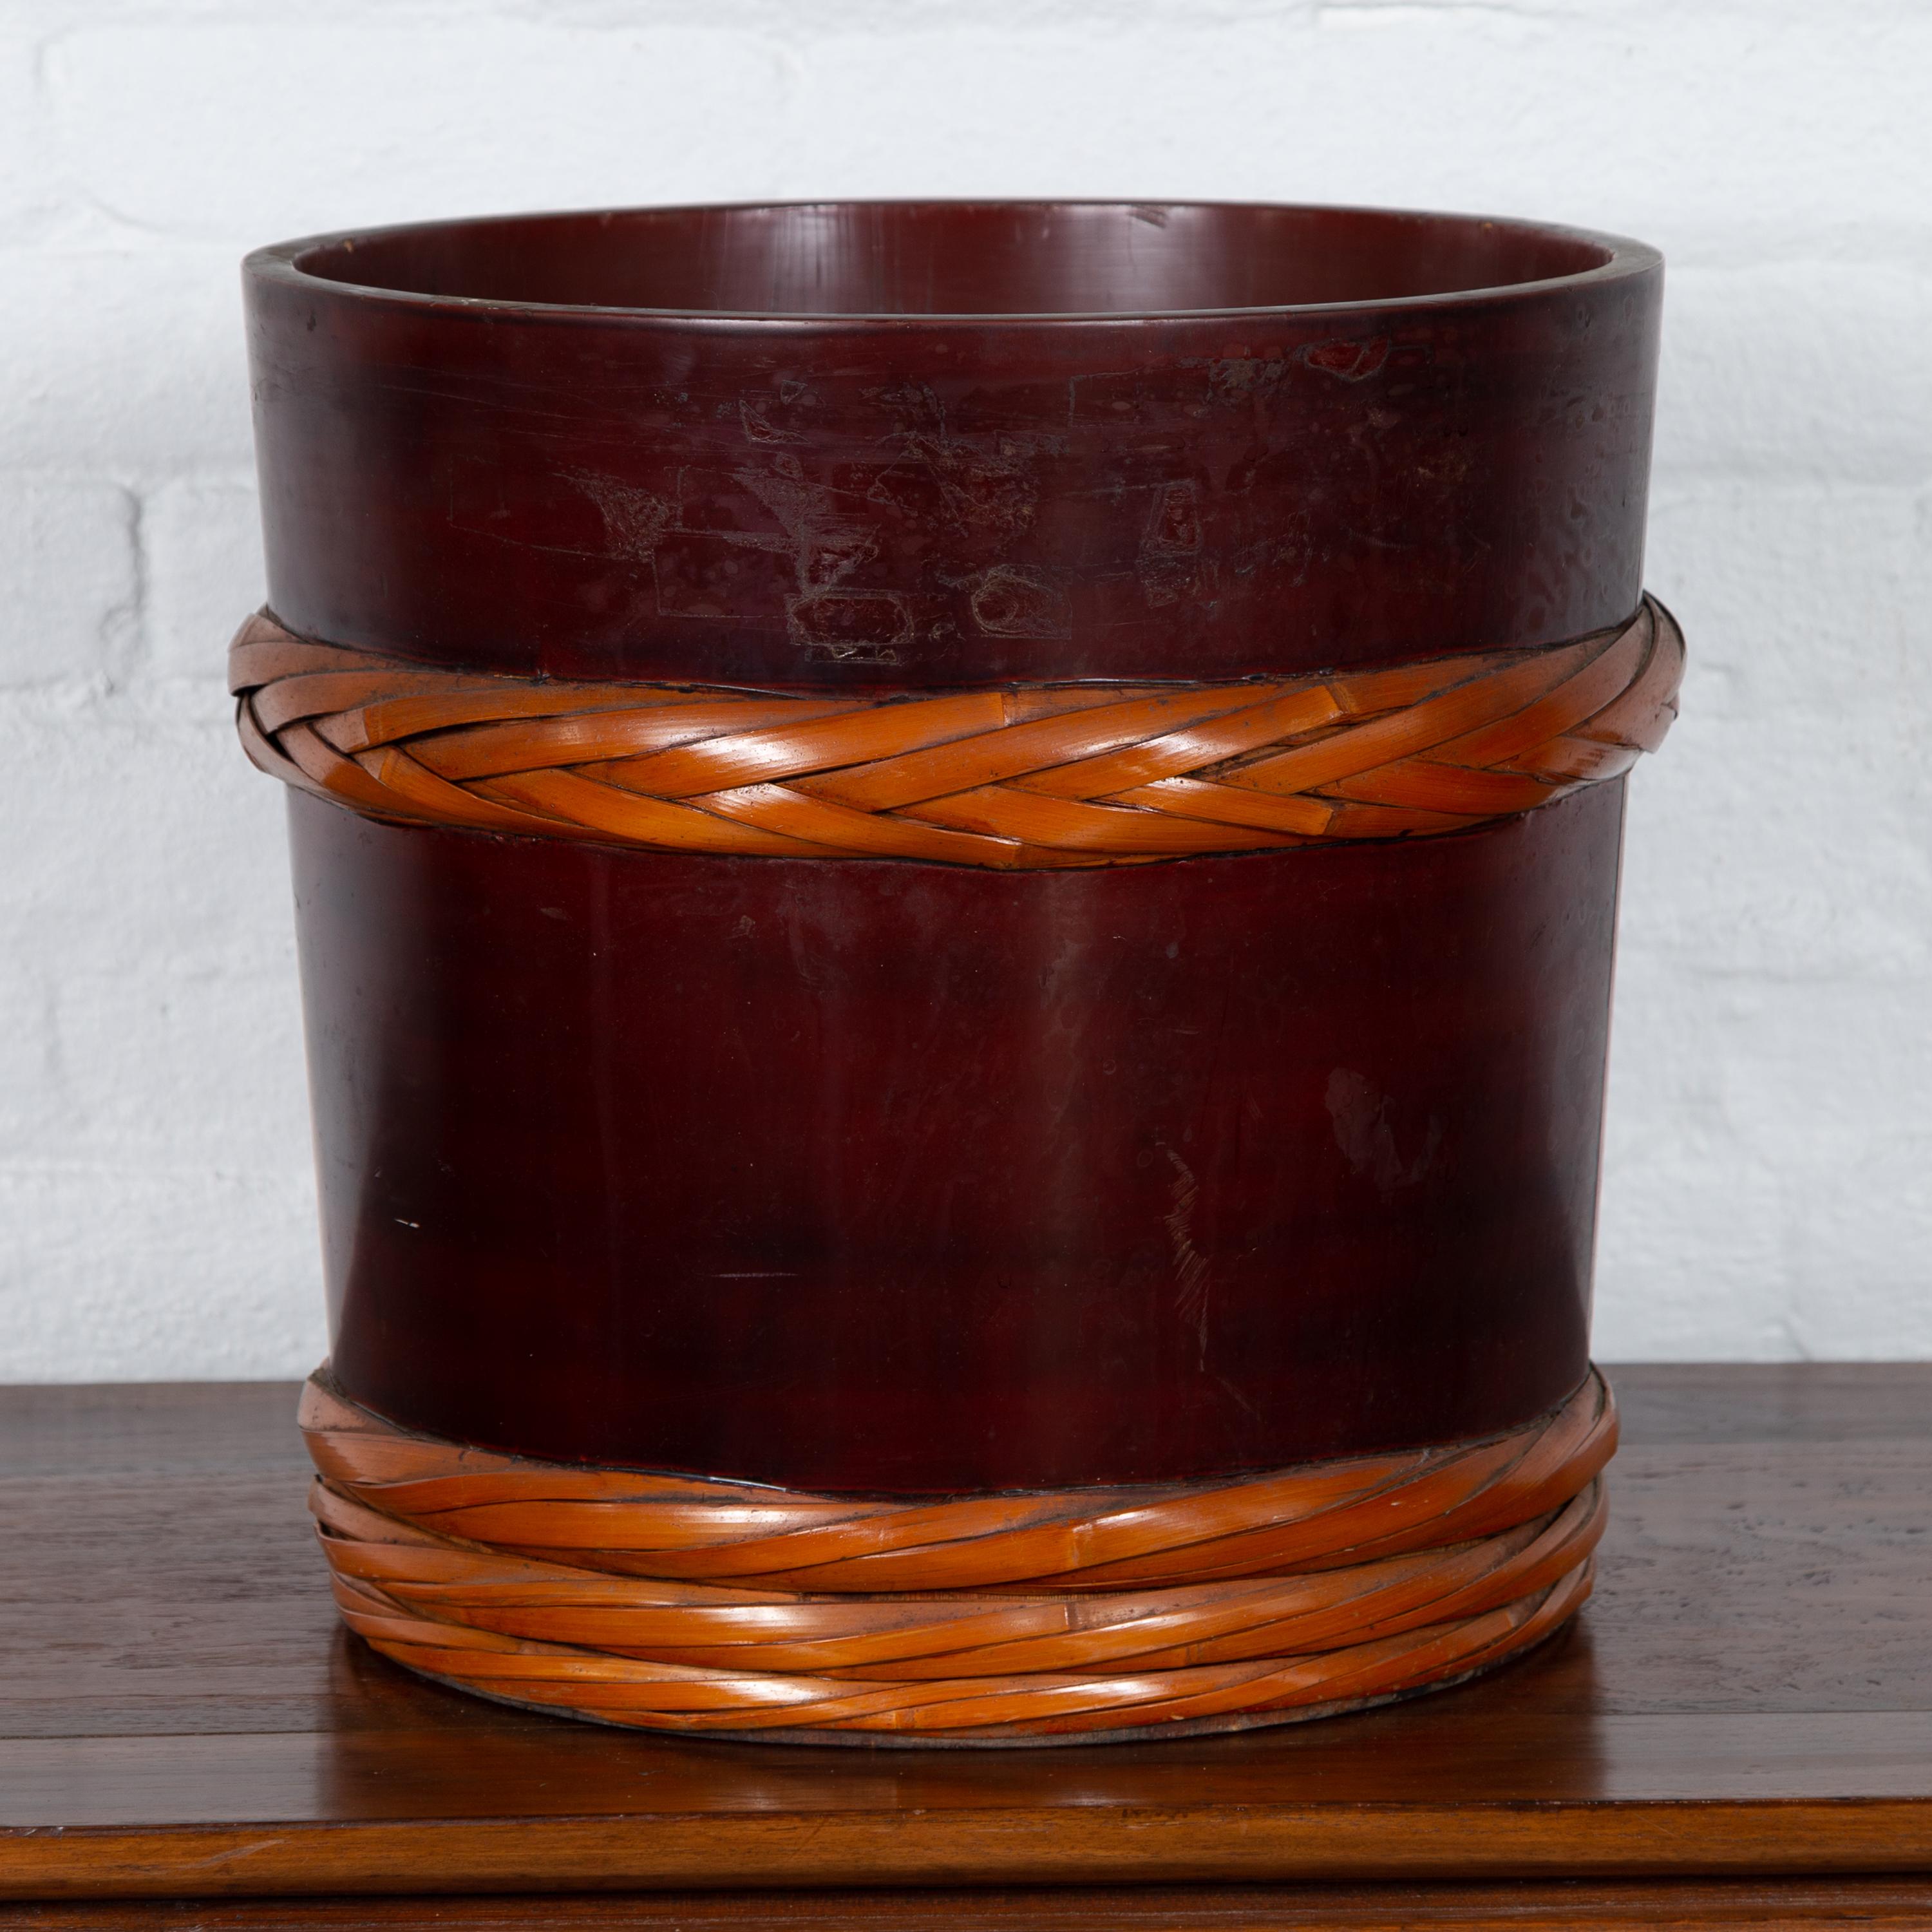 A vintage Chinese barrel planter from the 20th century, with rope design. Born in China, this charming barrel planter is probably between 40 and 80 years old. Presenting a cylindrical wooden body boasting a deep brown color with red undertone, the